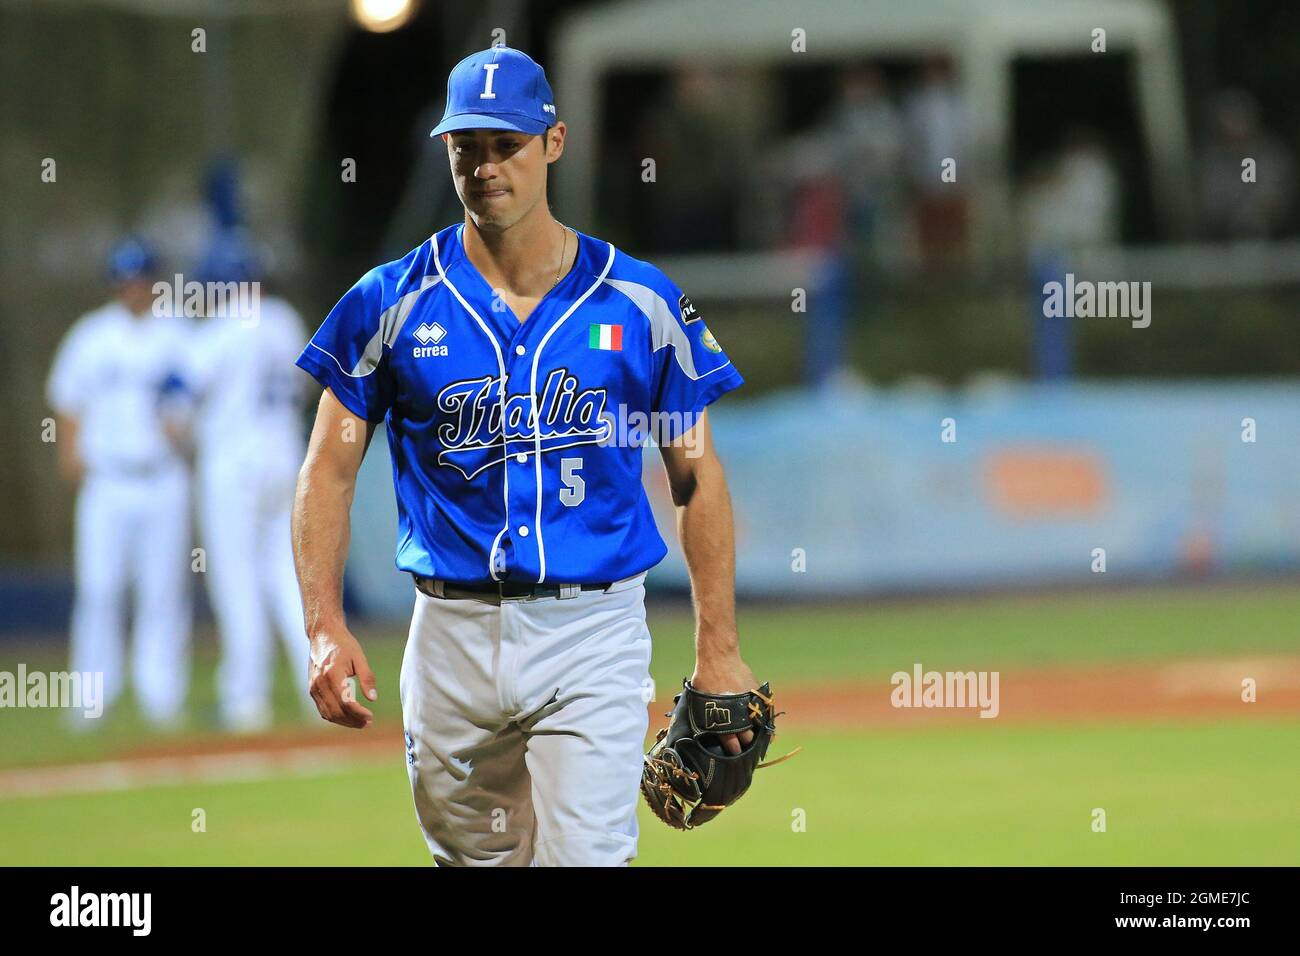 Italy. 17th Sep, 2021. Nicola Garbella (Italy) - Photo: Claudio Benedetto/LiveMedia Credit: Independent Photo Agency/Alamy Live News Stock Photo